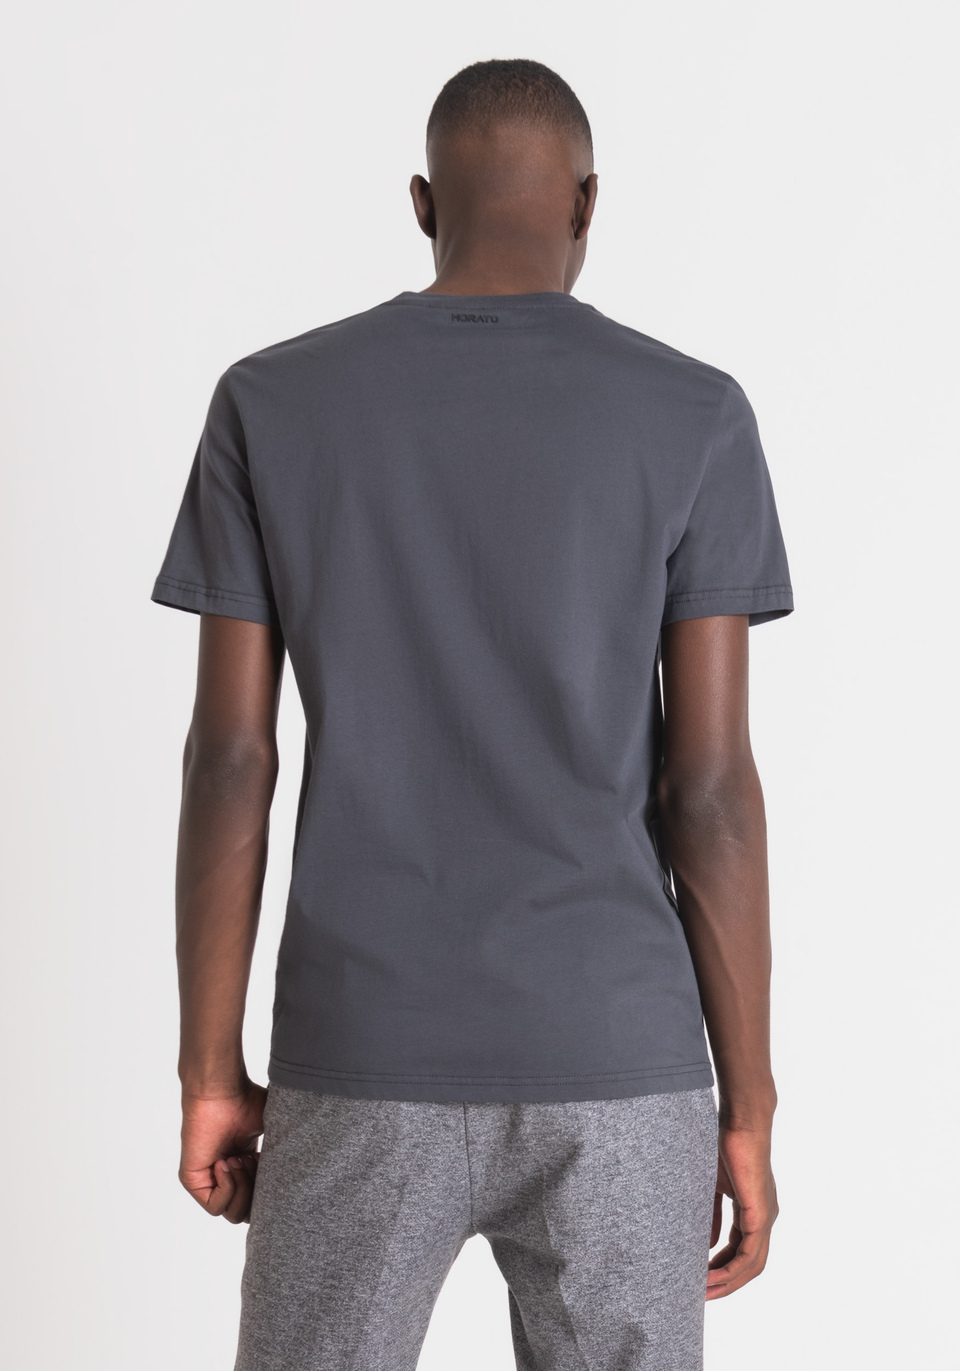 SLIM FIT T-SHIRT IN COTTON WITH WOLF PRINT - Antony Morato Online Shop